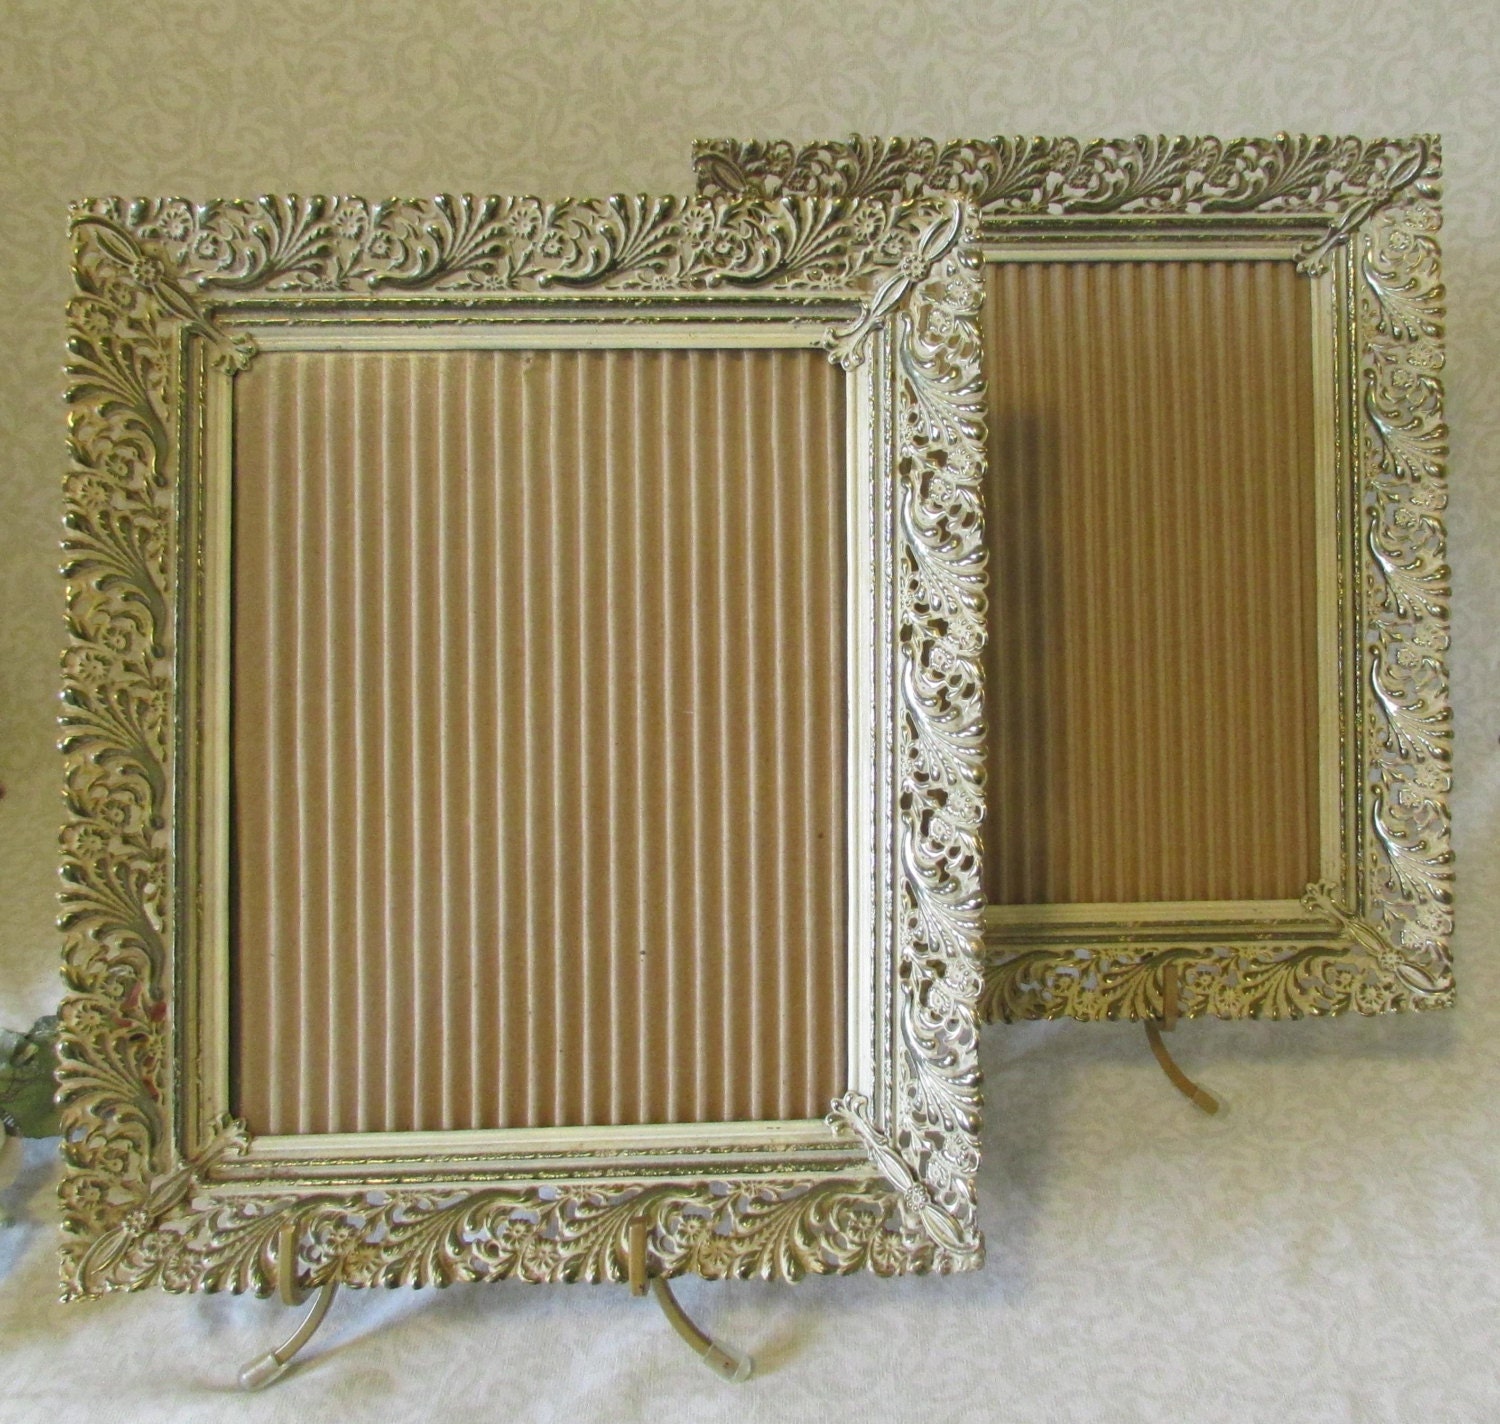 Hollywood Regency Filigree Picture Frames 8 X 10 By Fineromance